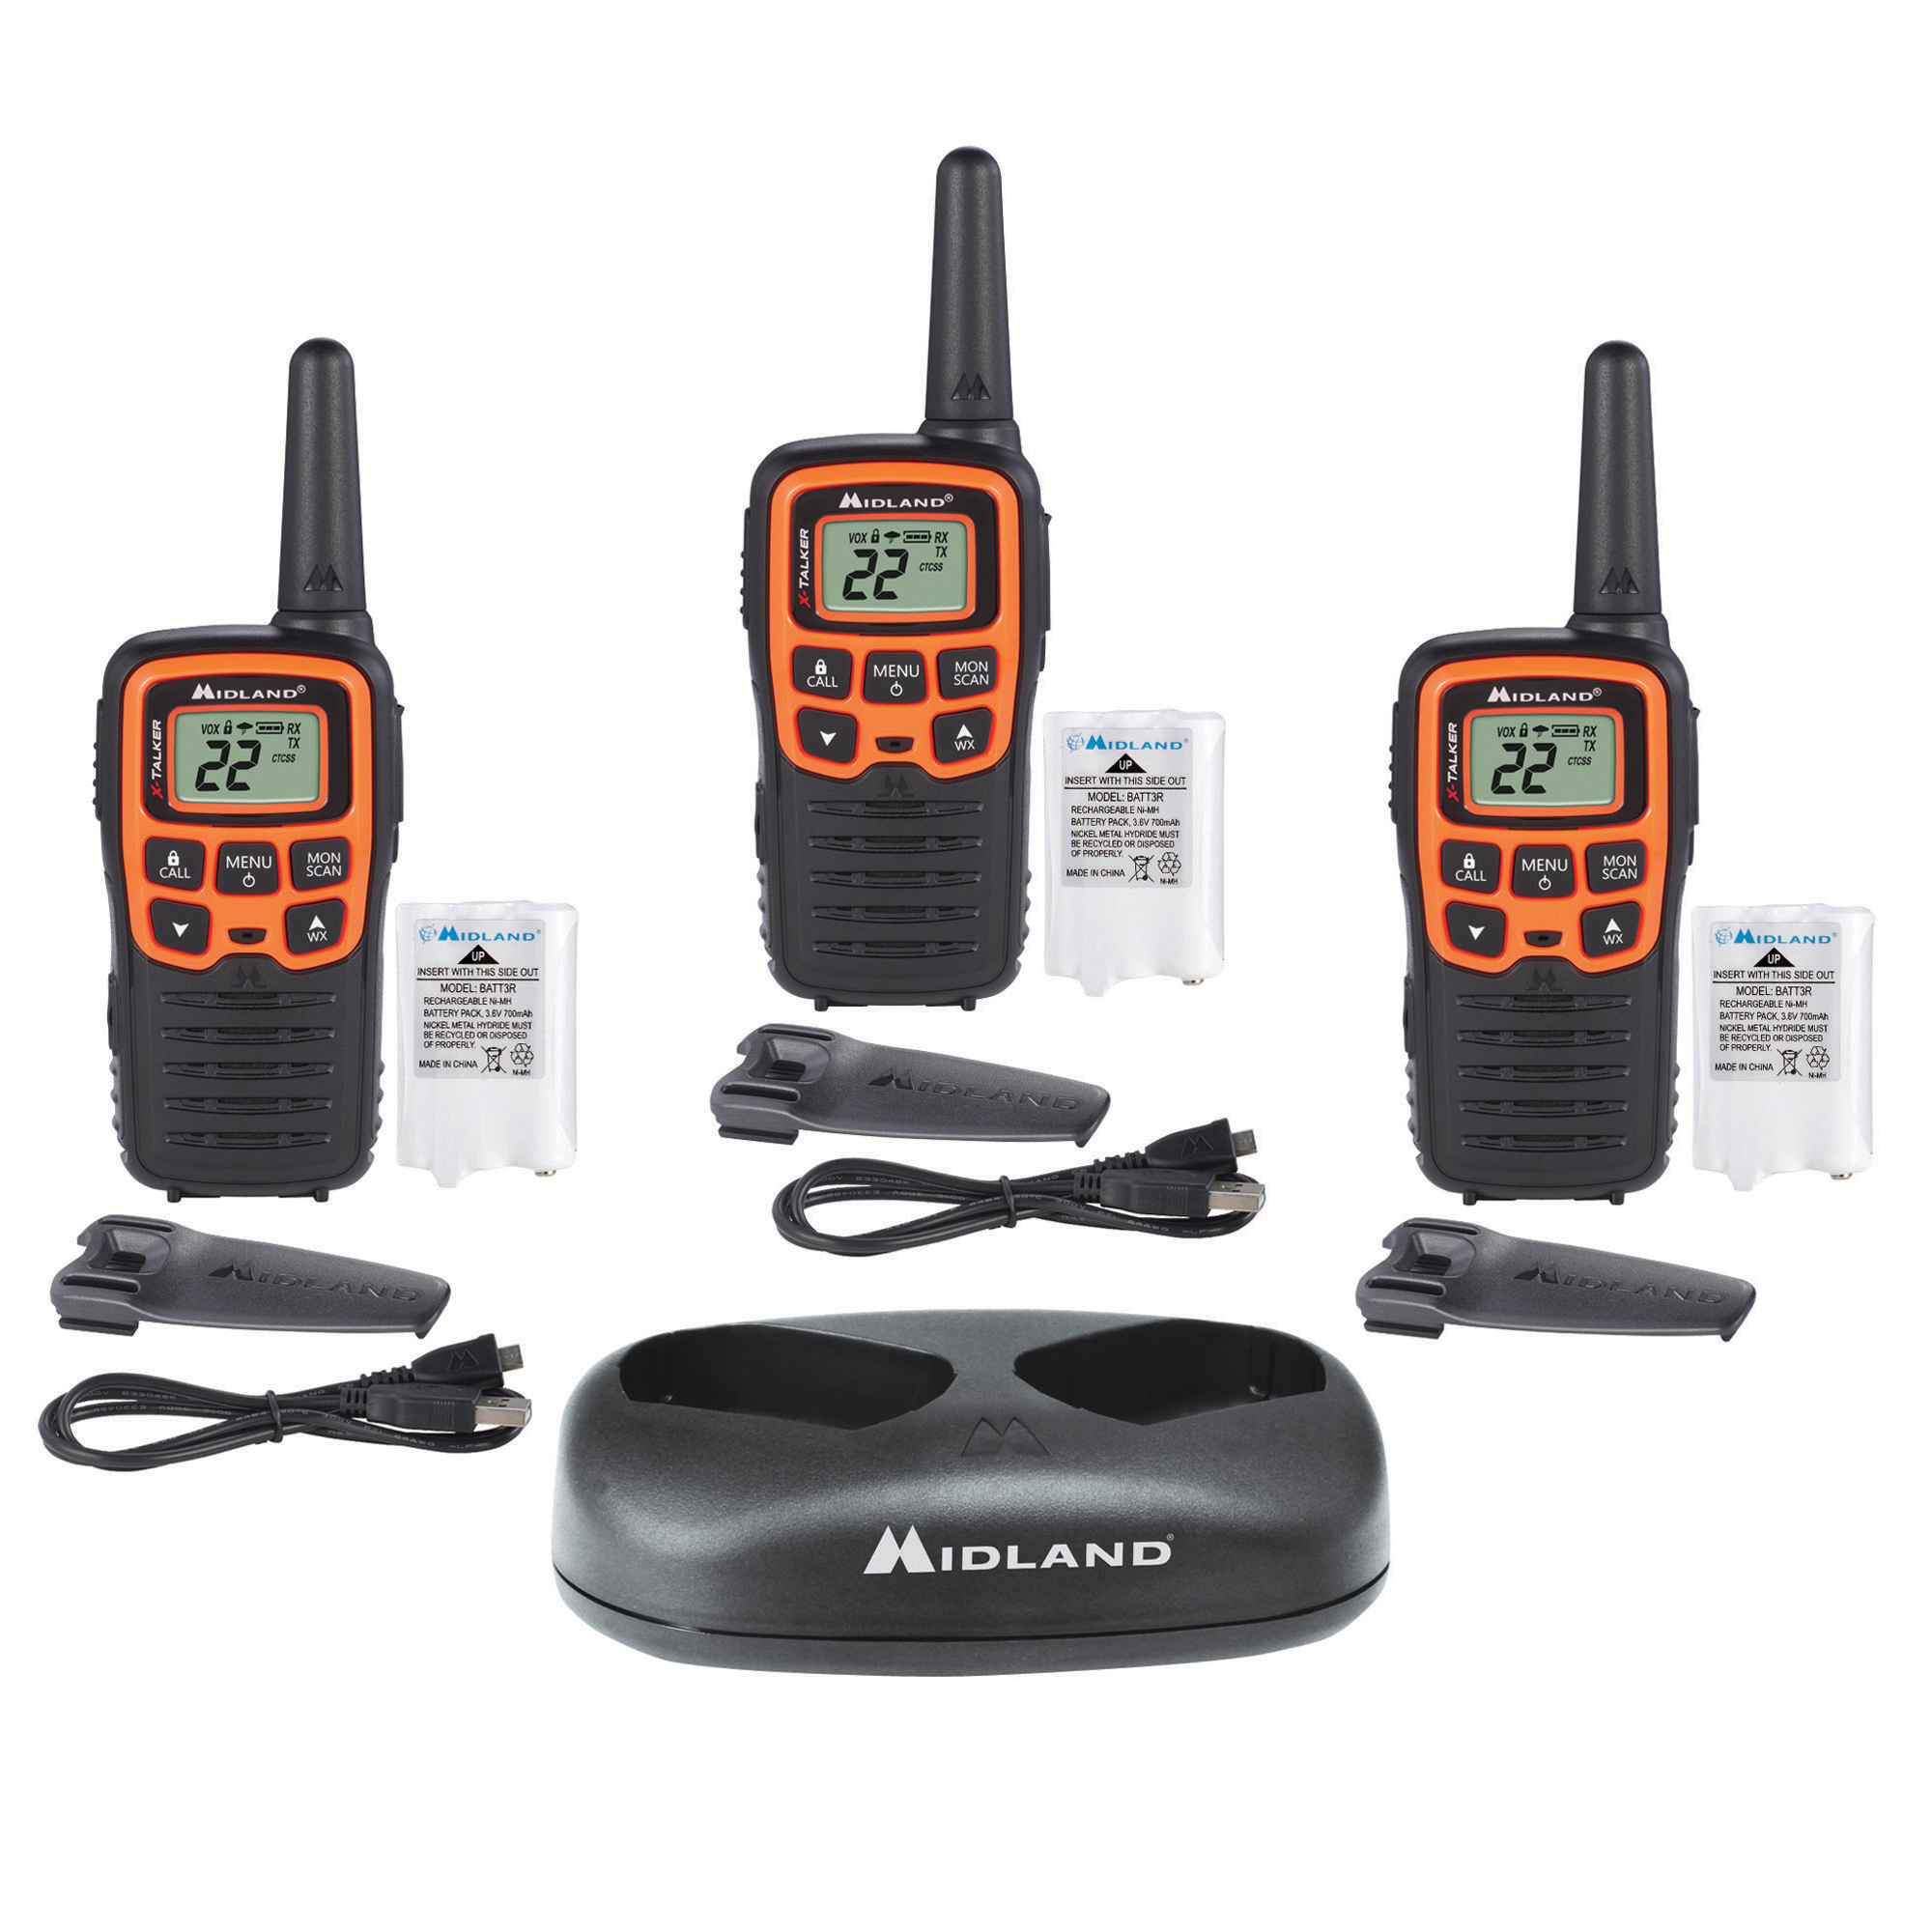 MIDLAND X-TALKER 3 PACK  OF 2-WAY RADIOS UP TO 28